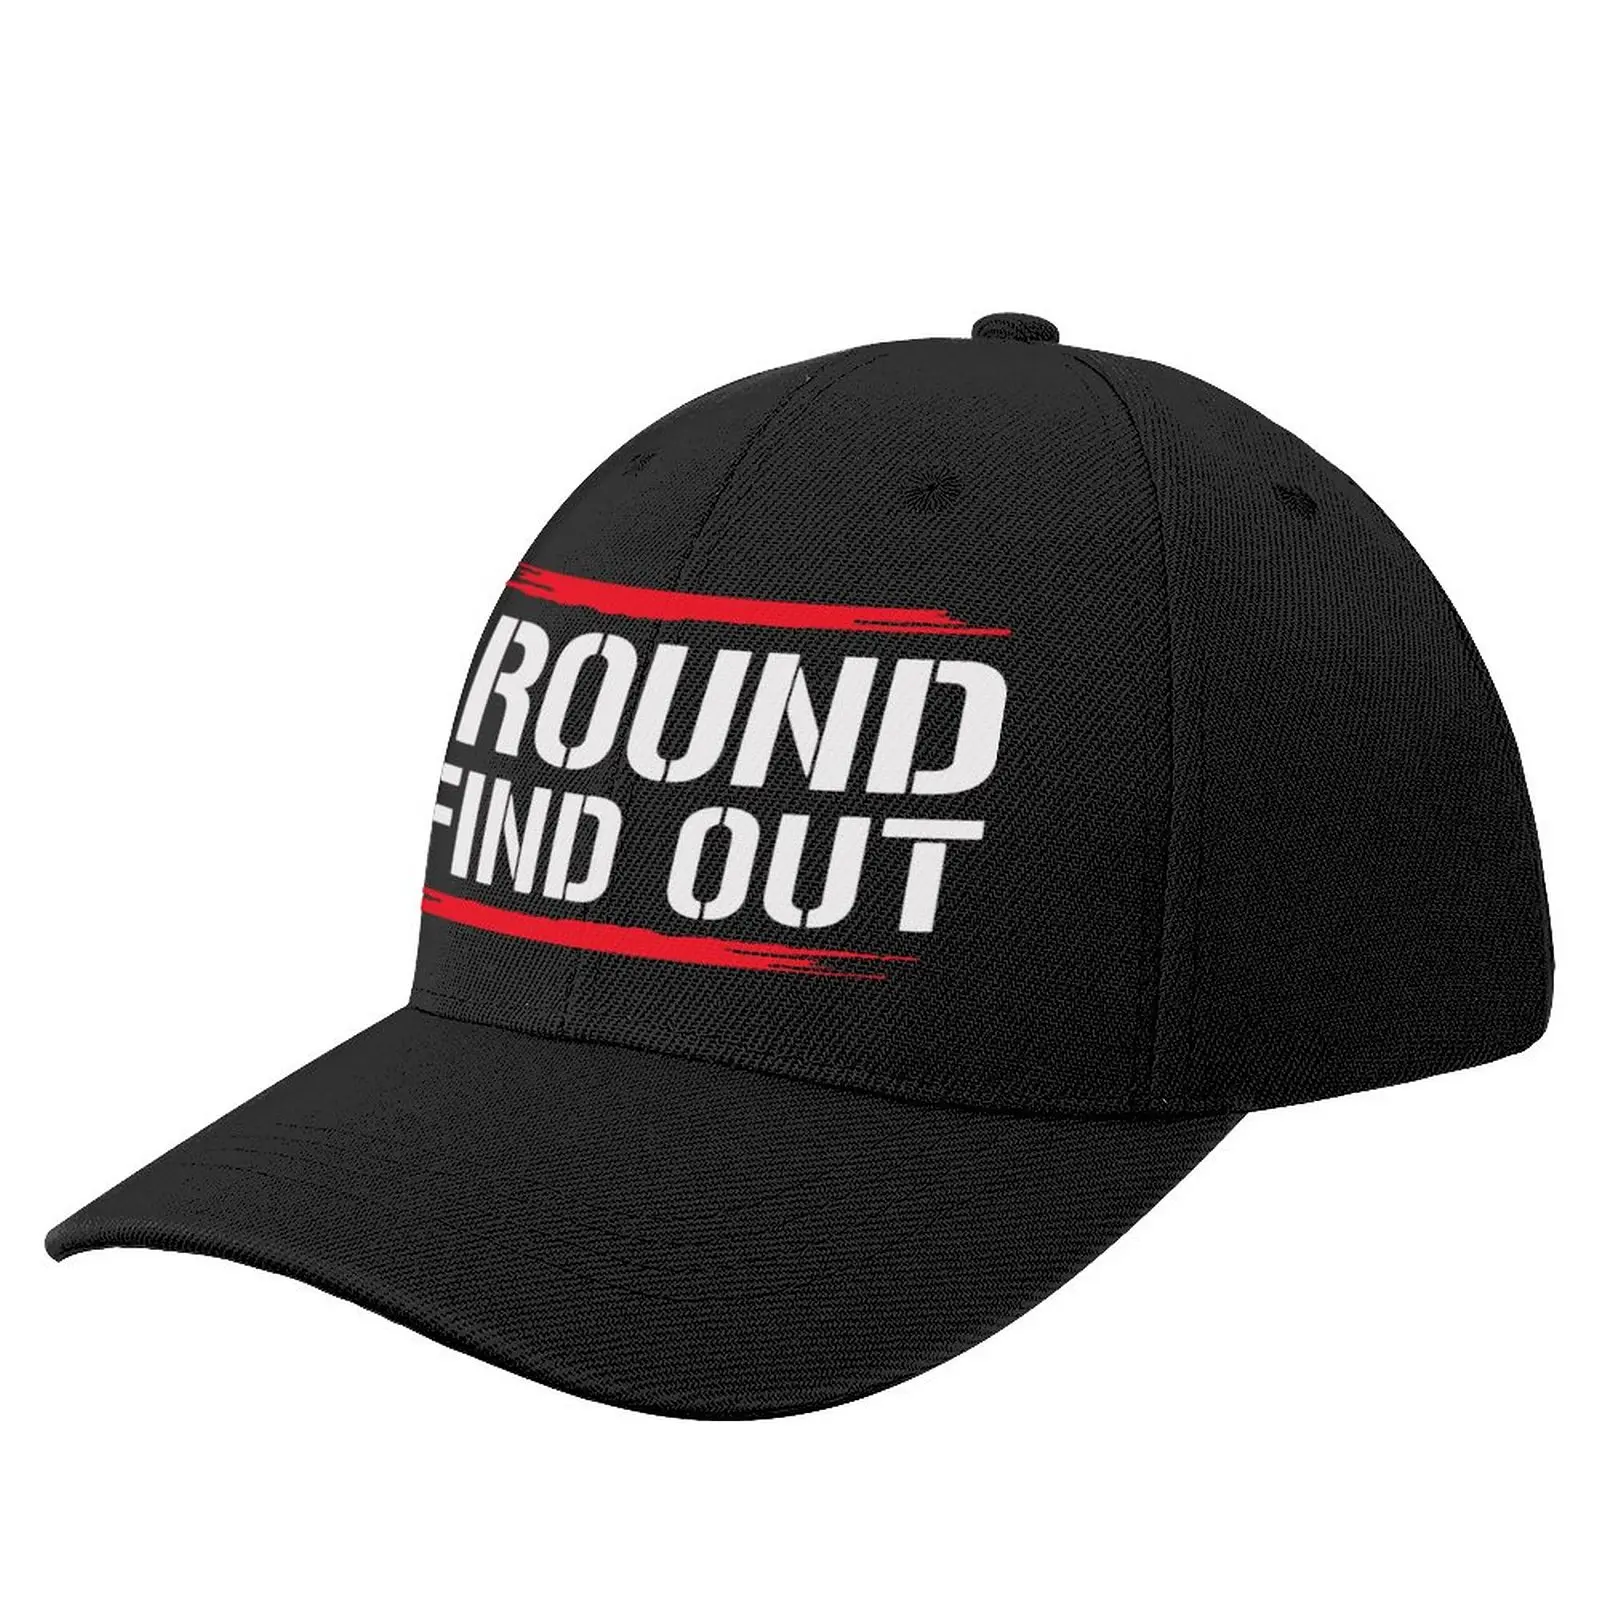 

F Around And Find Out Baseball Cap Vintage hiking hat Brand Man Caps Men Golf Wear Women'S